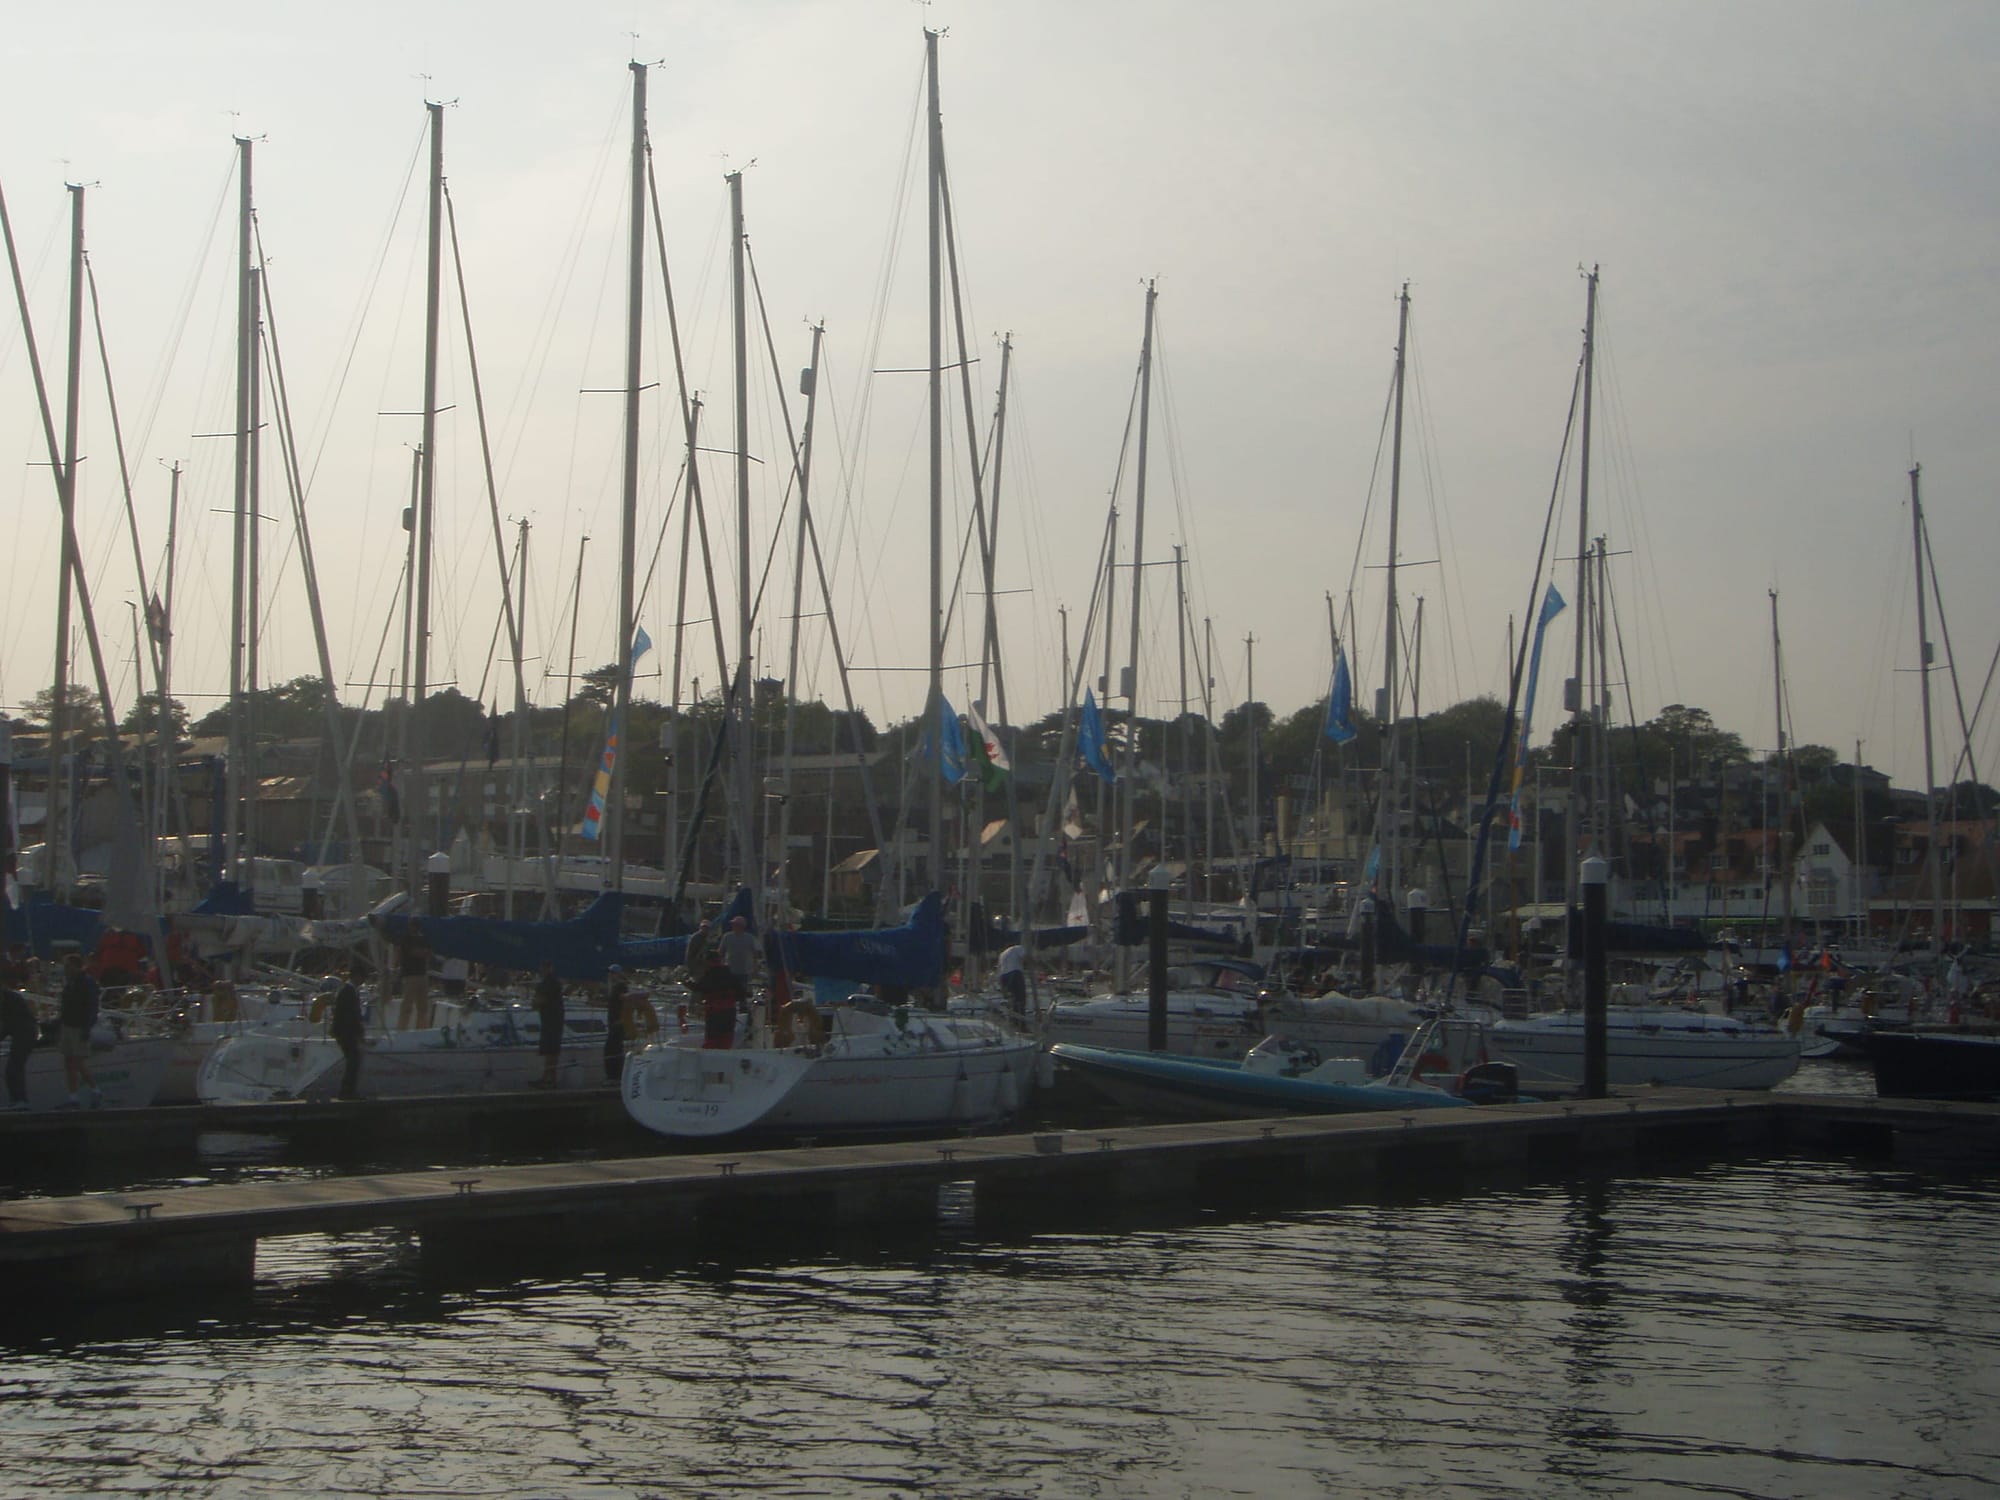 Boats in Cowes Yacht Haven